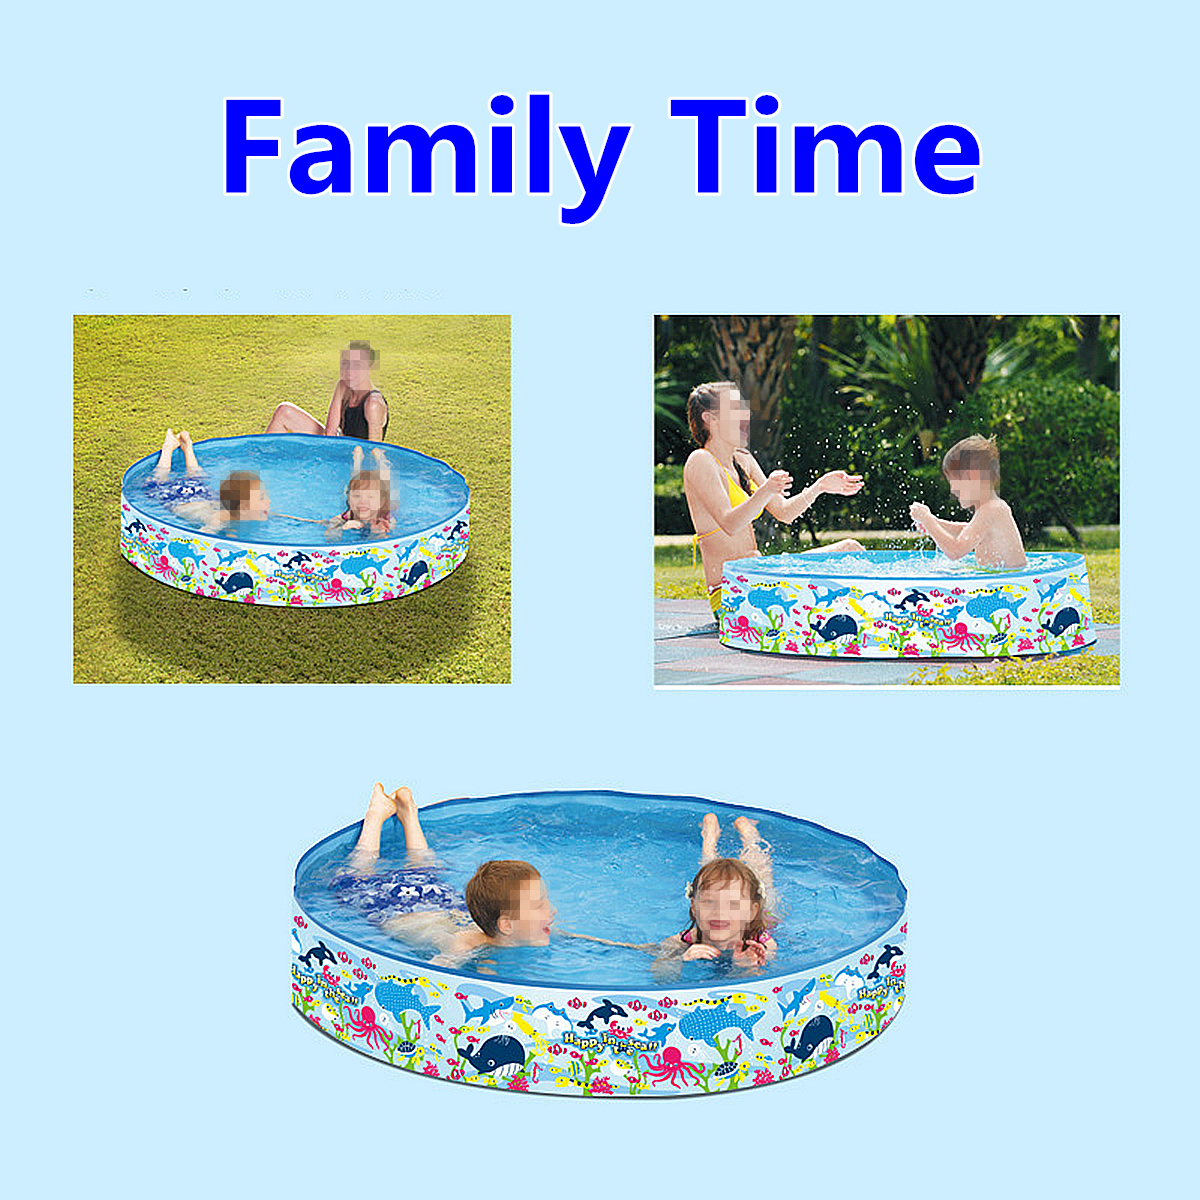 120150cm-Inflatable-Swimming-Pool-Family-Outdoor-Garden-Kid-Play-Bathtub-1697943-1